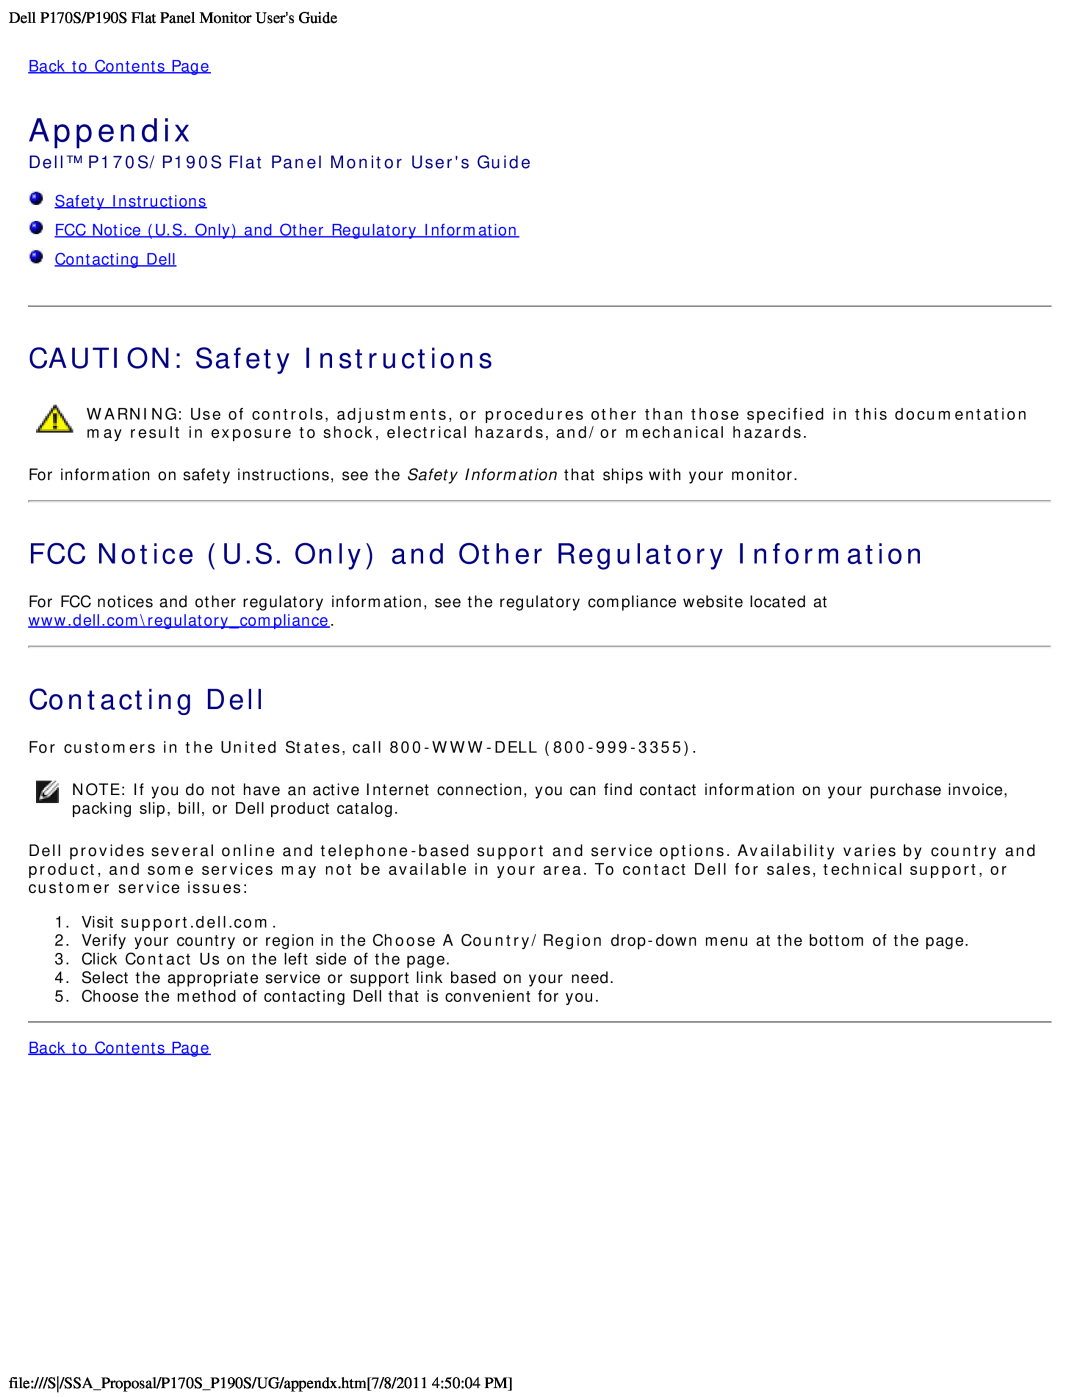 Dell P170s Appendix, CAUTION Safety Instructions, FCC Notice U.S. Only and Other Regulatory Information, Contacting Dell 